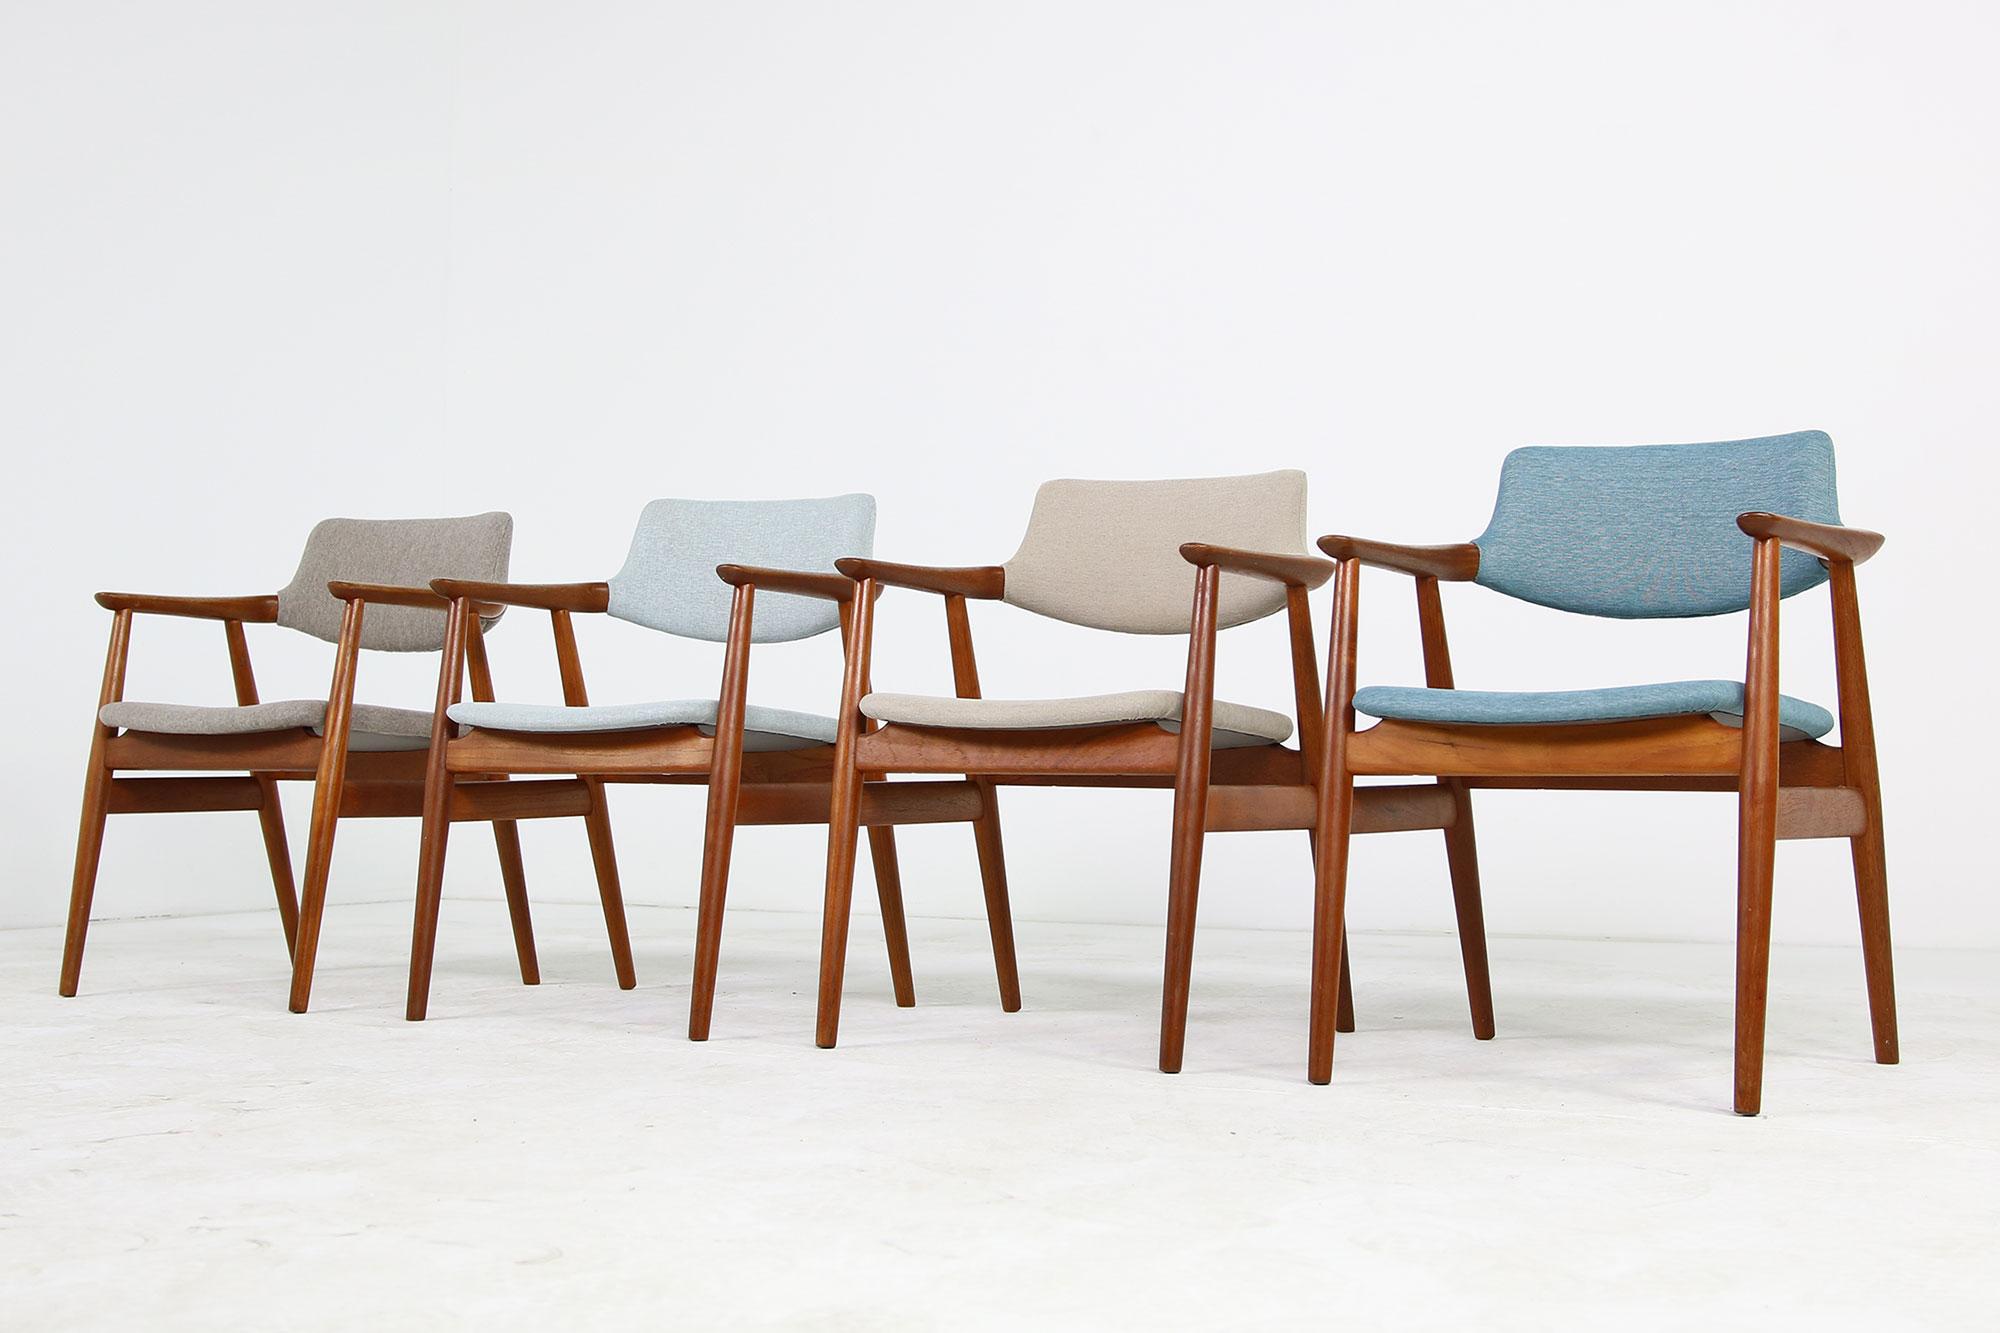 Beautiful set of four 1960s armchairs, in a fantastic condition. Made in Denmark, designed by Svend Aage Eriksen, these chairs are also known as designed by Erik Kirkegaard. Danish modern design, manufactured by Glostrup Denmark. Four different,